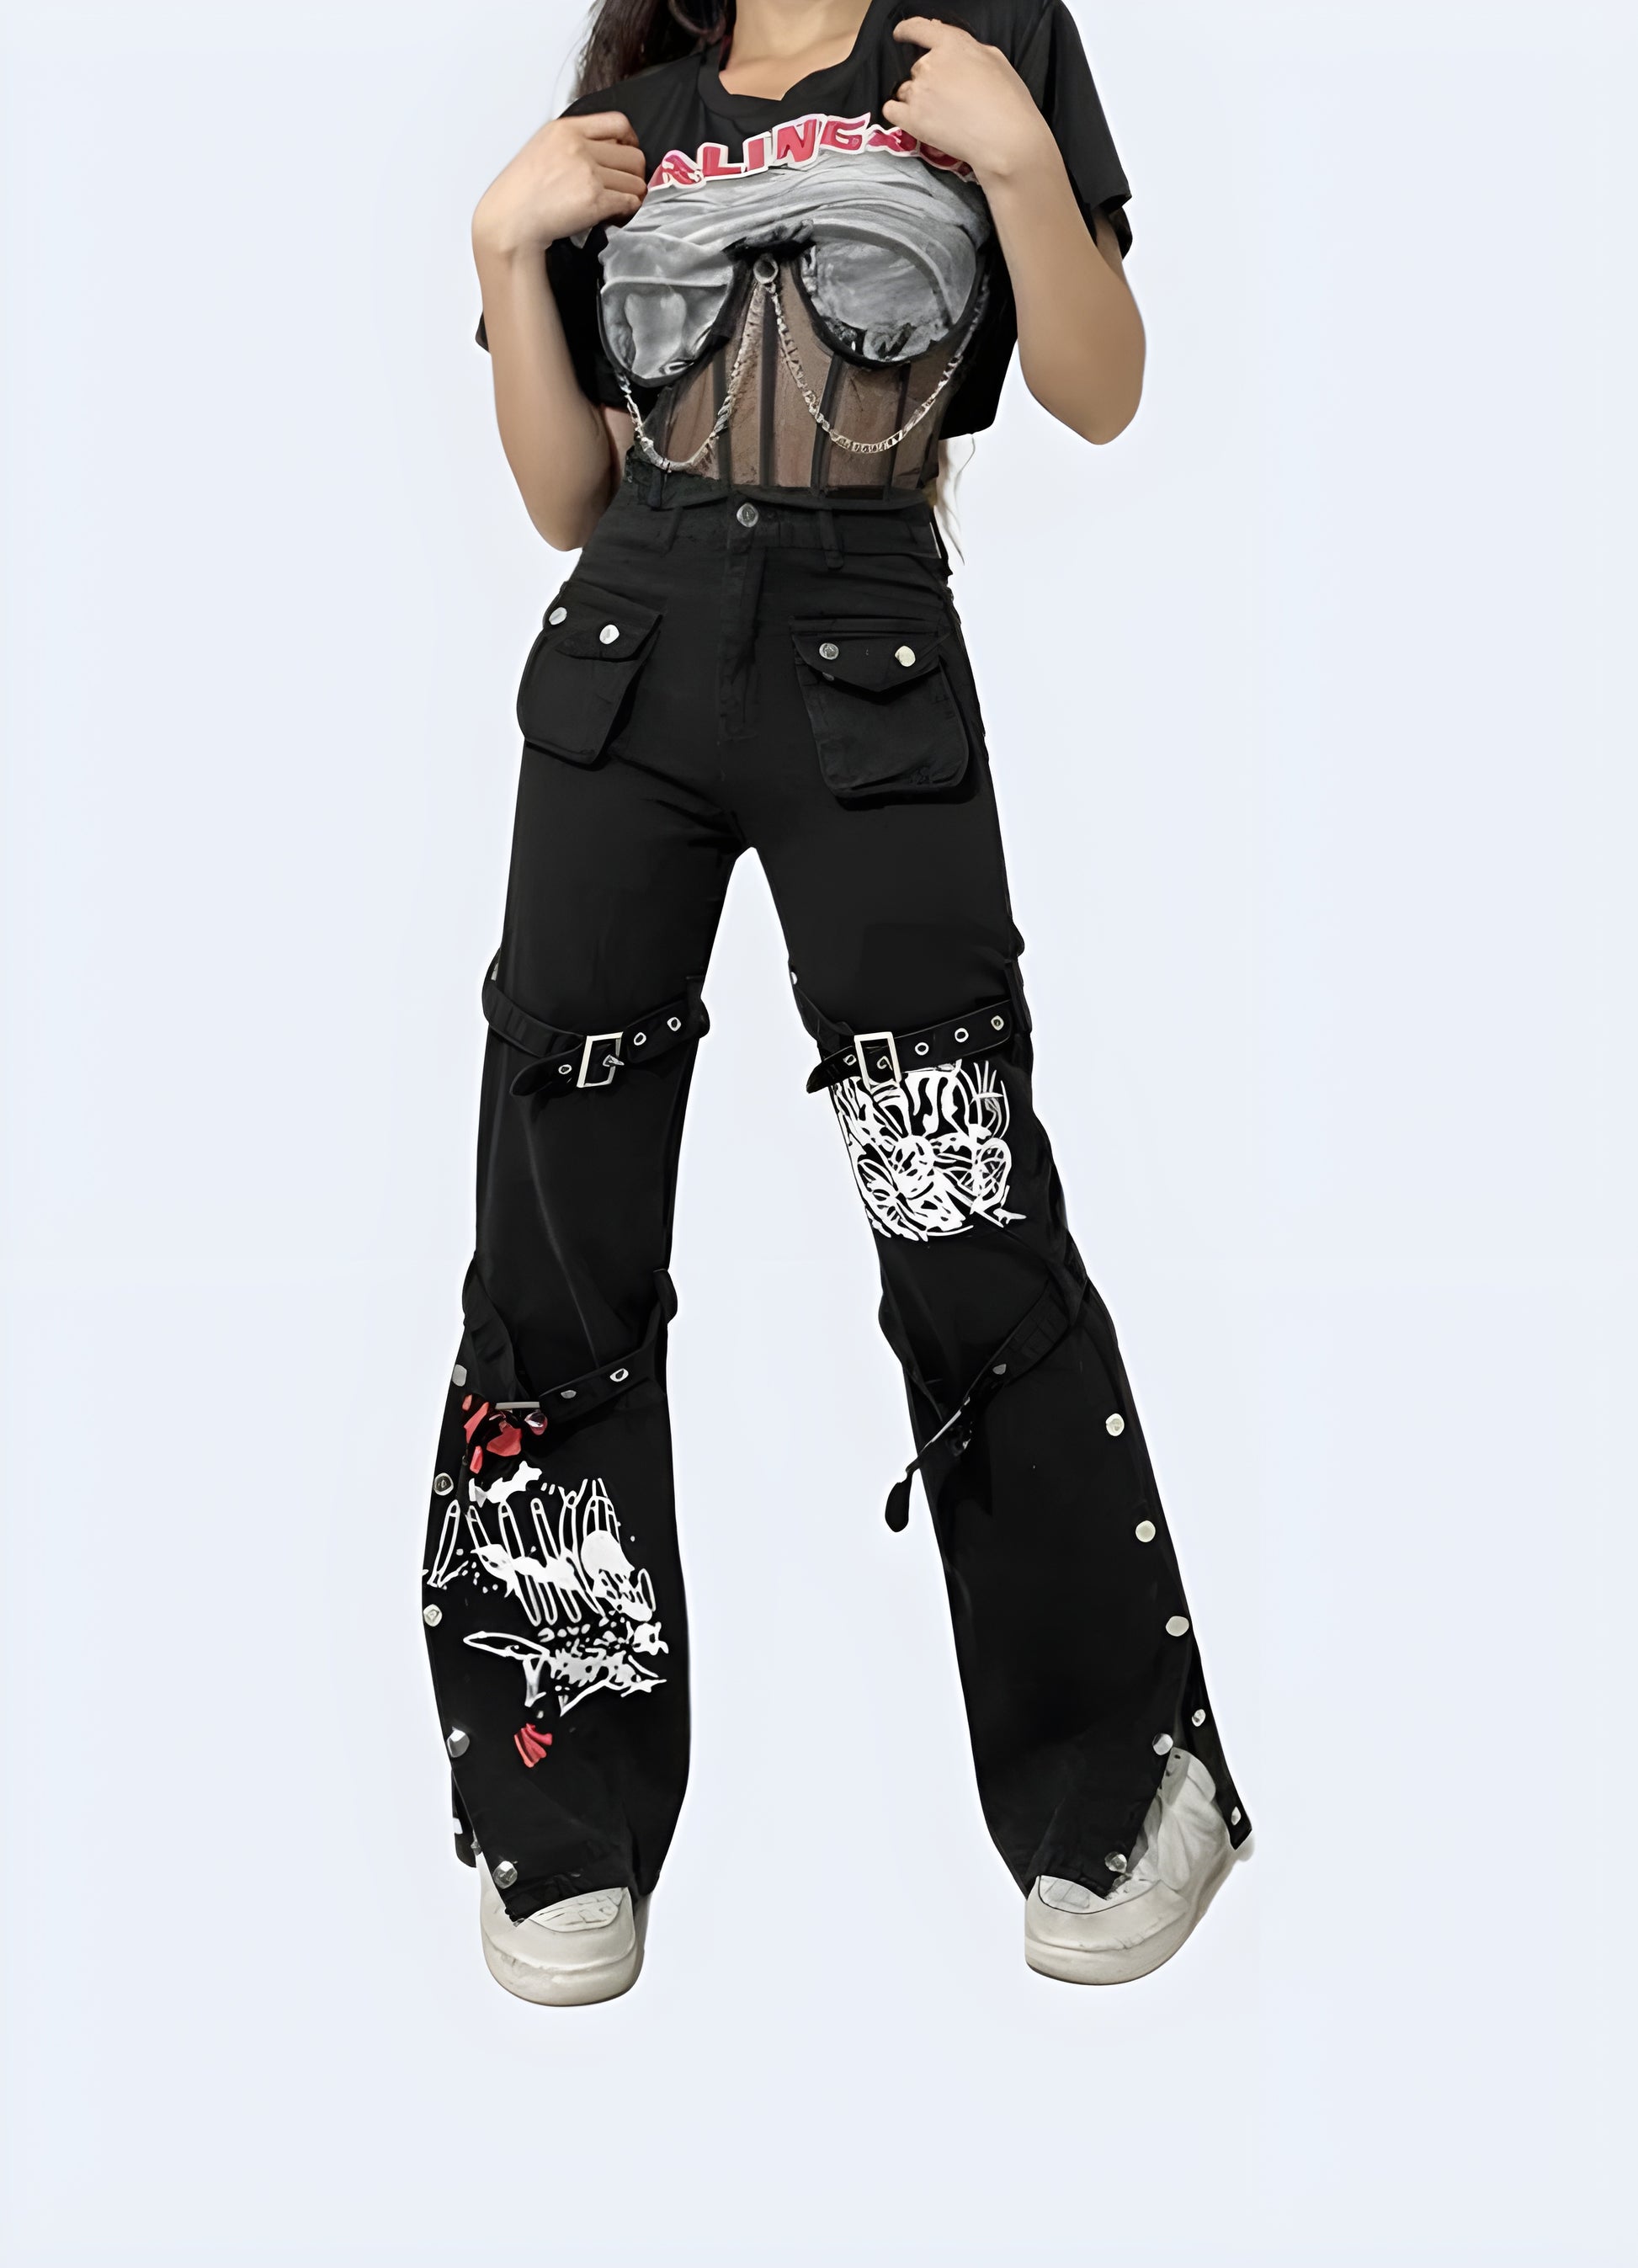 Goth cargo pants adding a layer of mysterious charm to your streetwear ensemble.